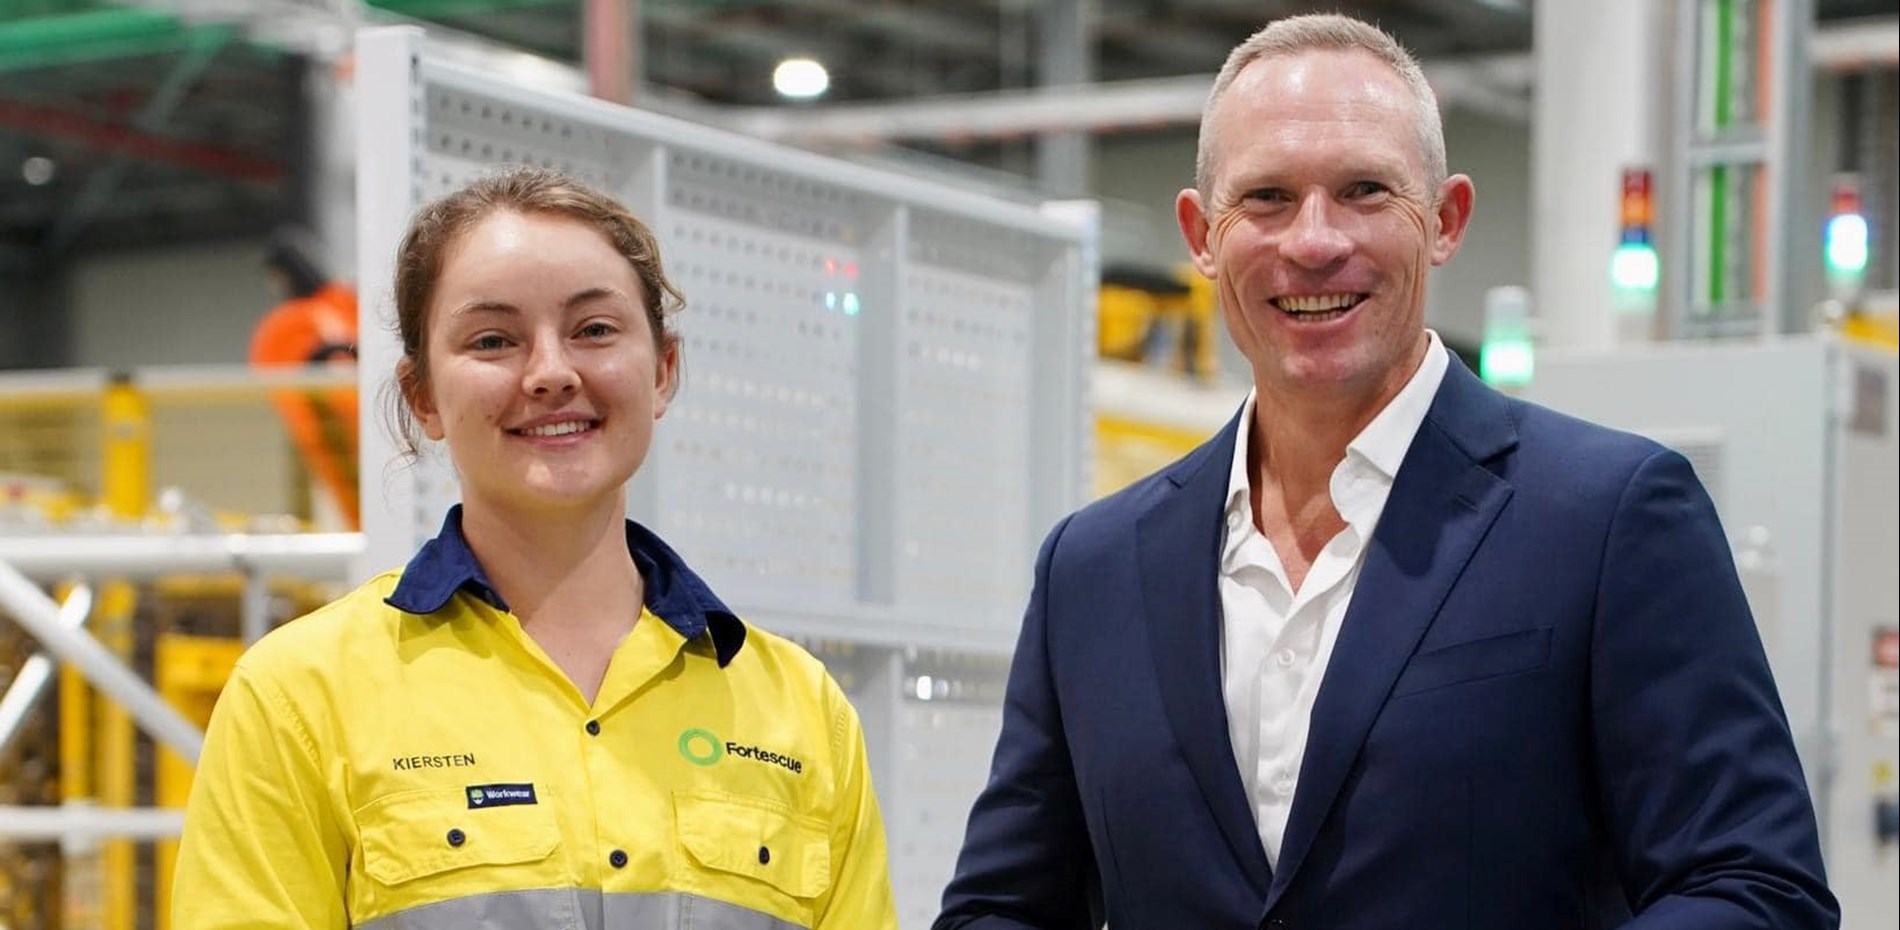 Gladstone shines as Fortescue opens Australia's first commercial scale hydrogen electrolyser manufacturing facility Main Image